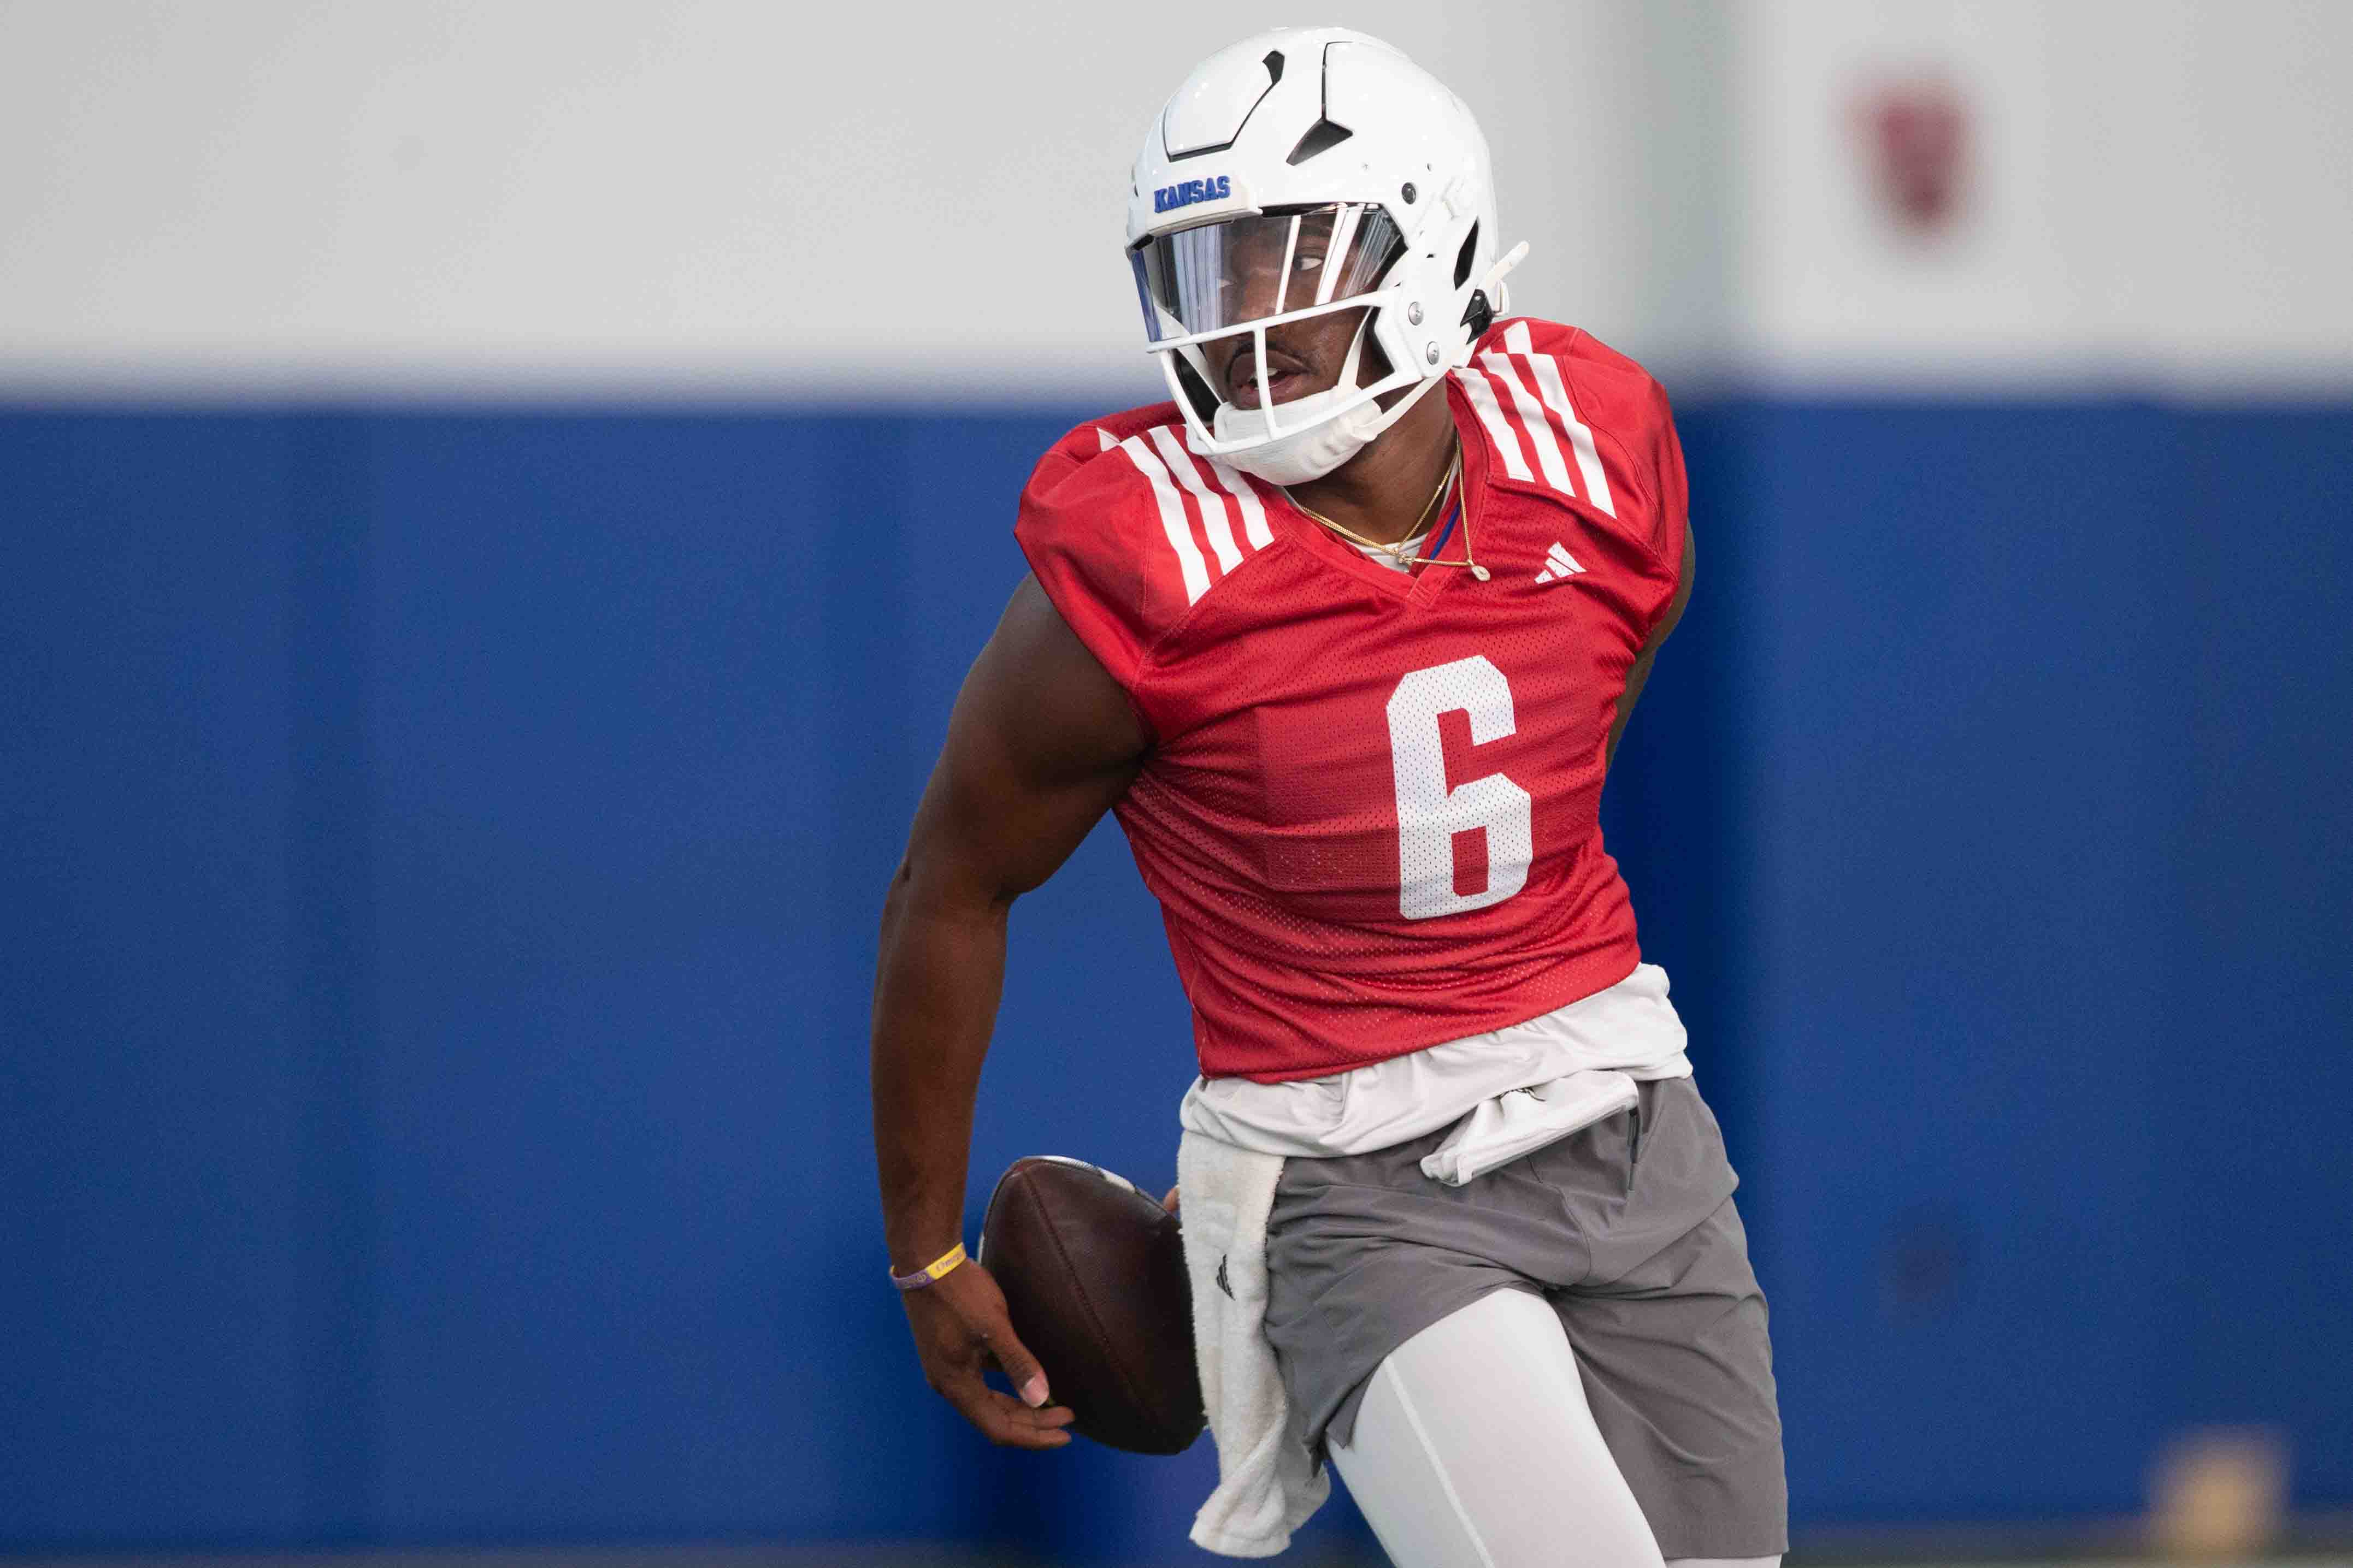 Jalon Daniels, happy and practicing, is poised to take Kansas football to new heights